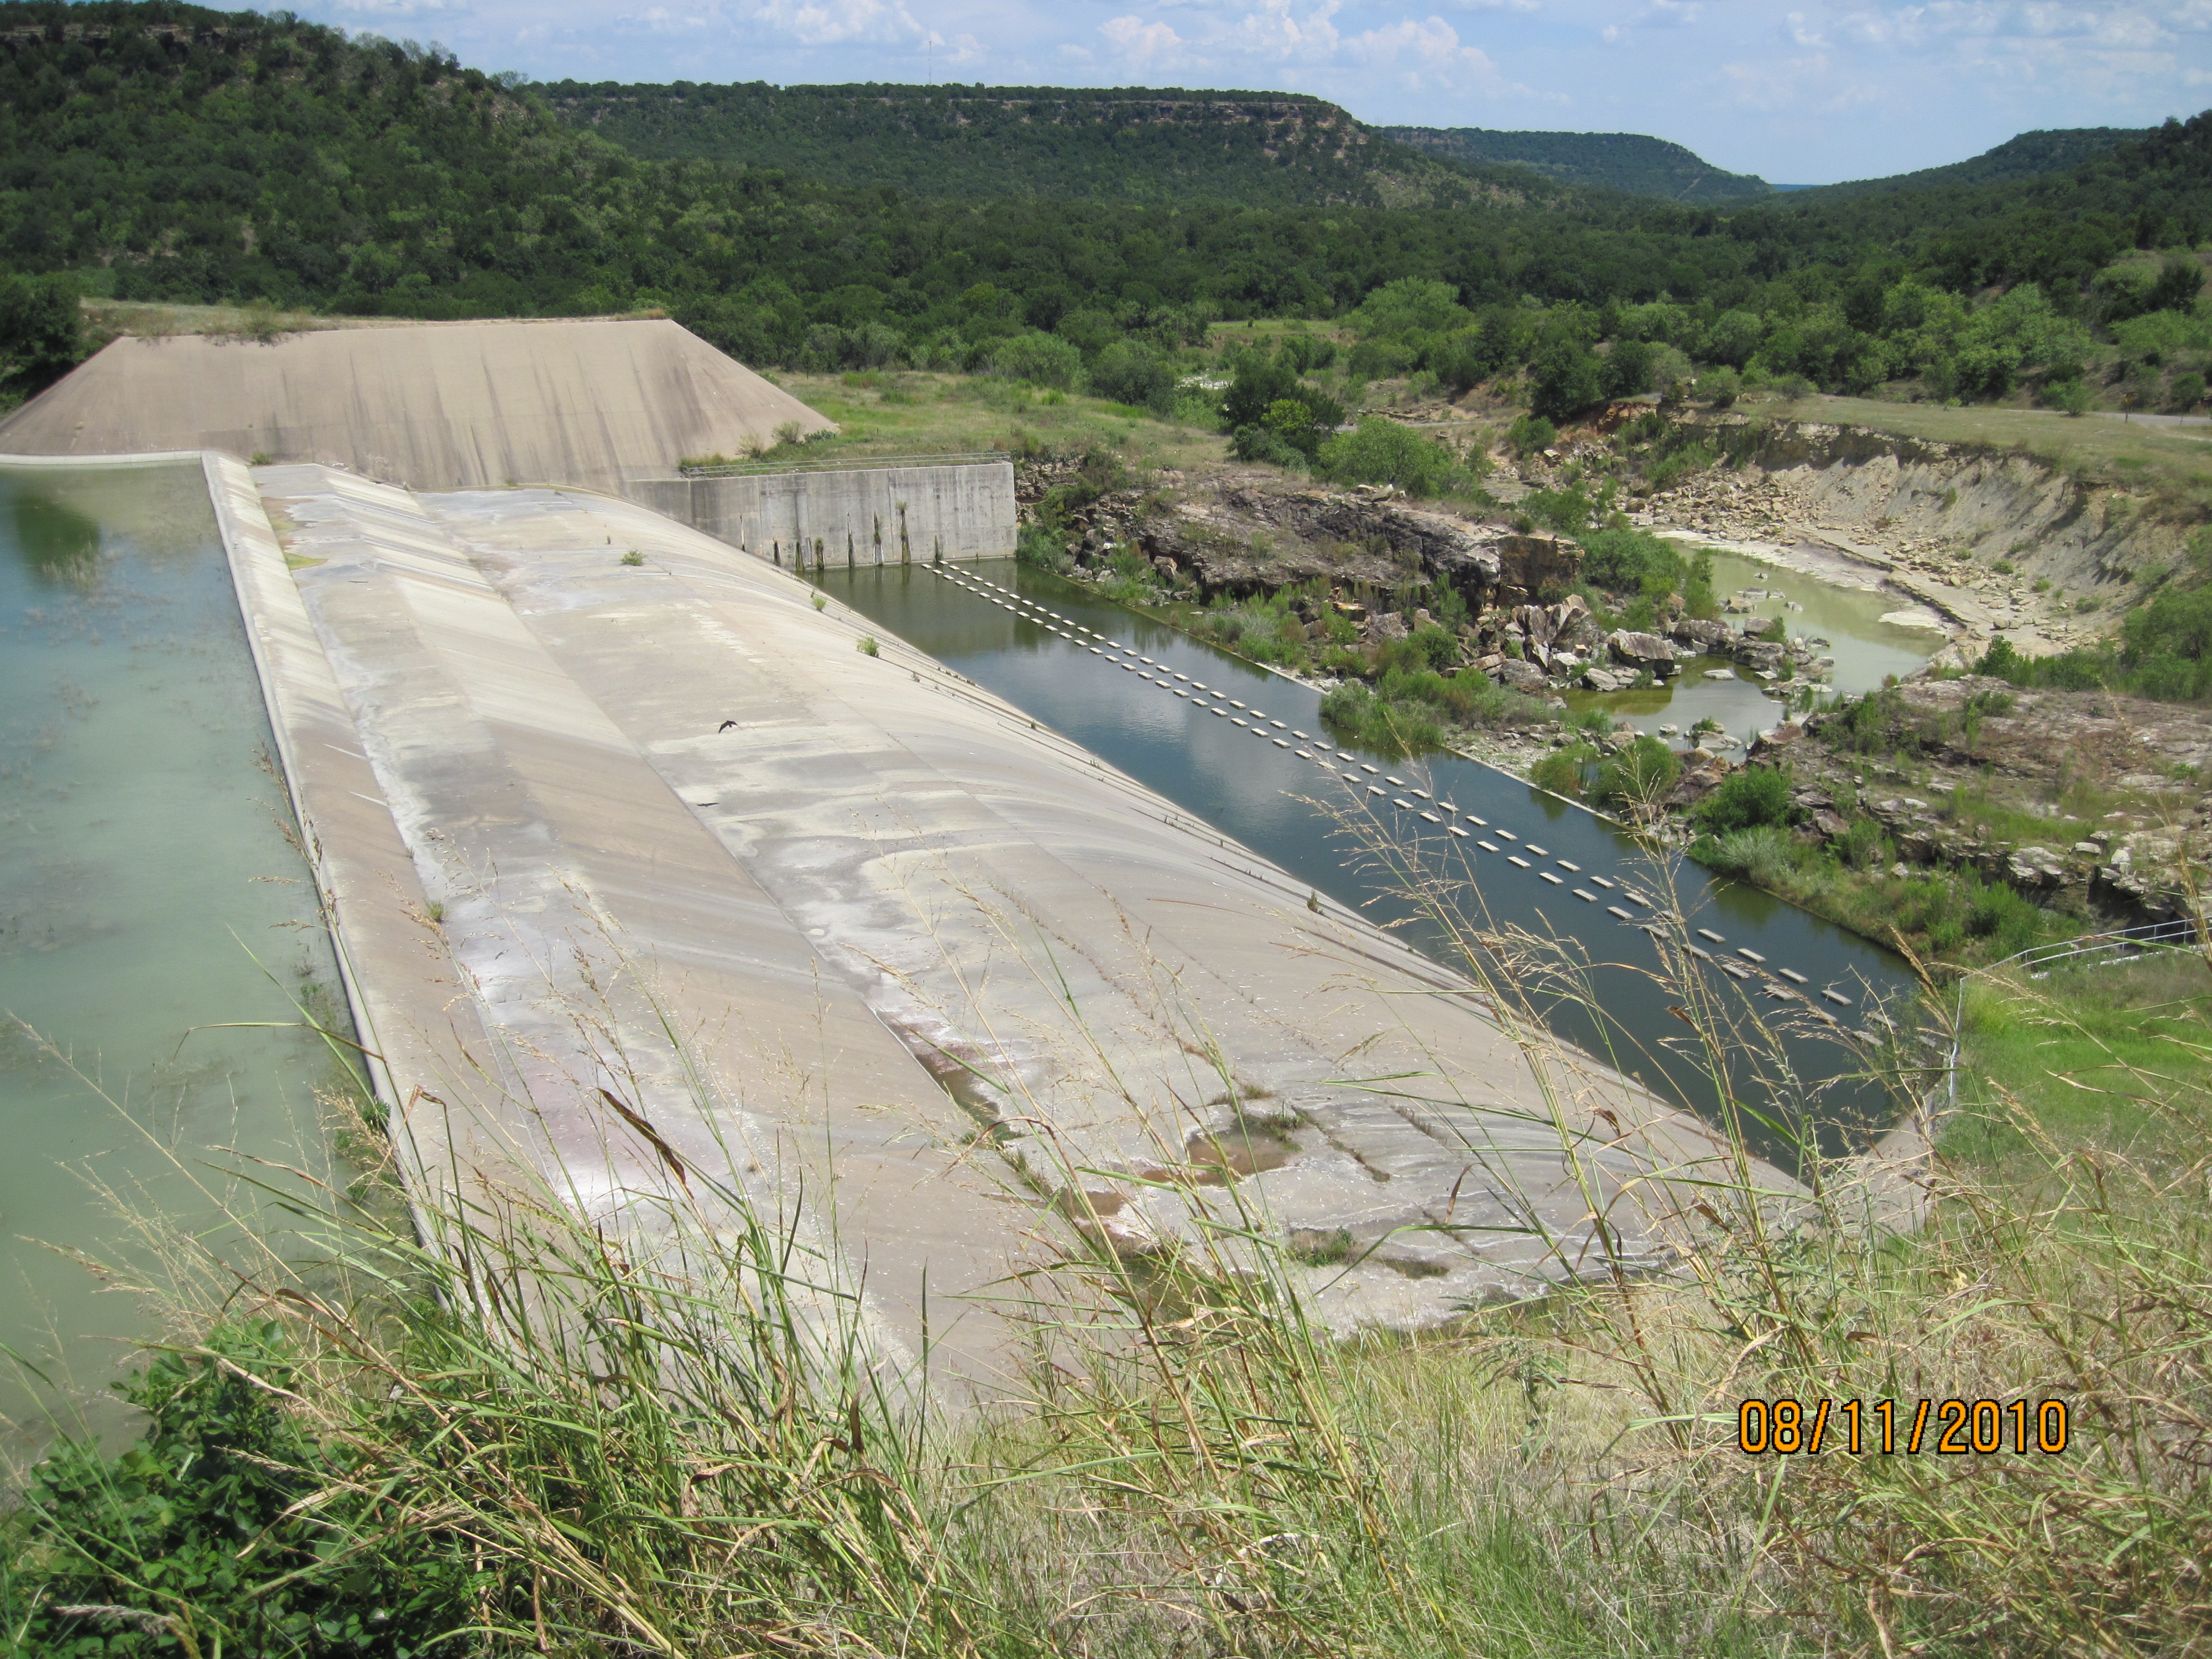 Another view of the Palo Pinto Spillway